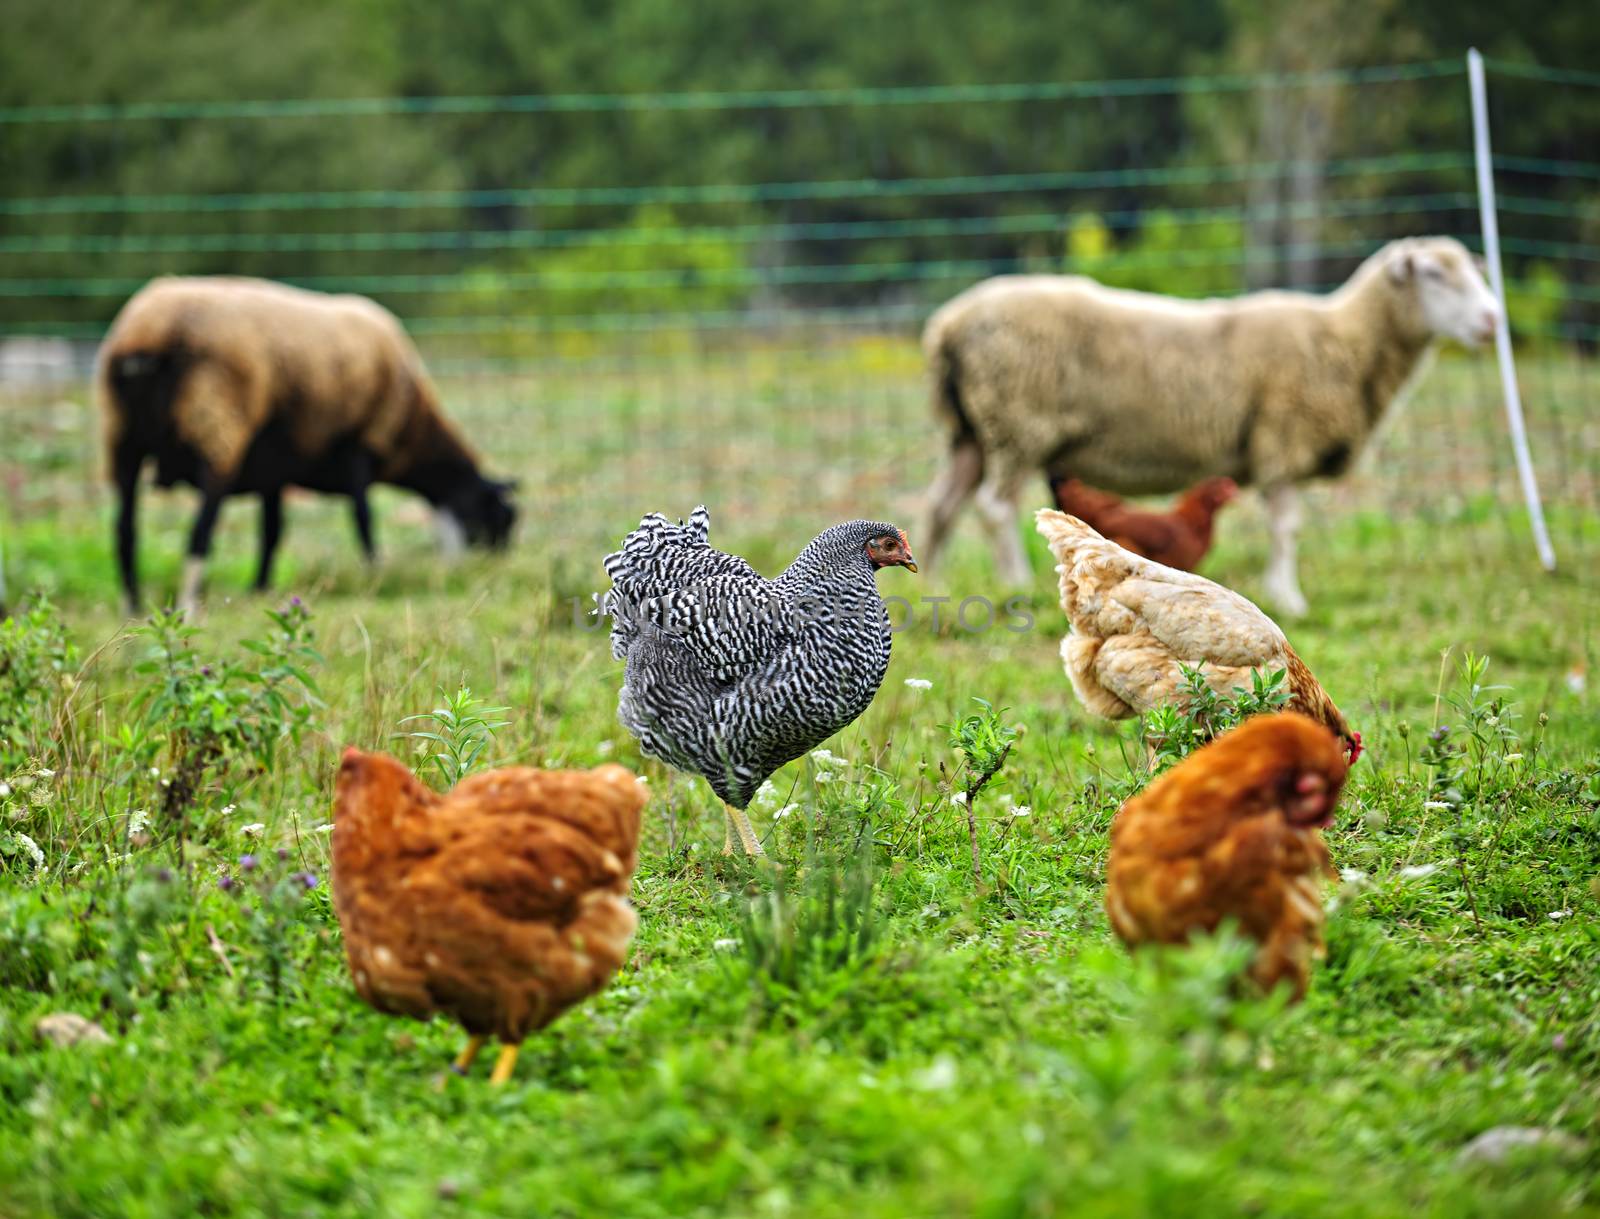 Chickens and sheep freely grazing on a small scale sustainable farm